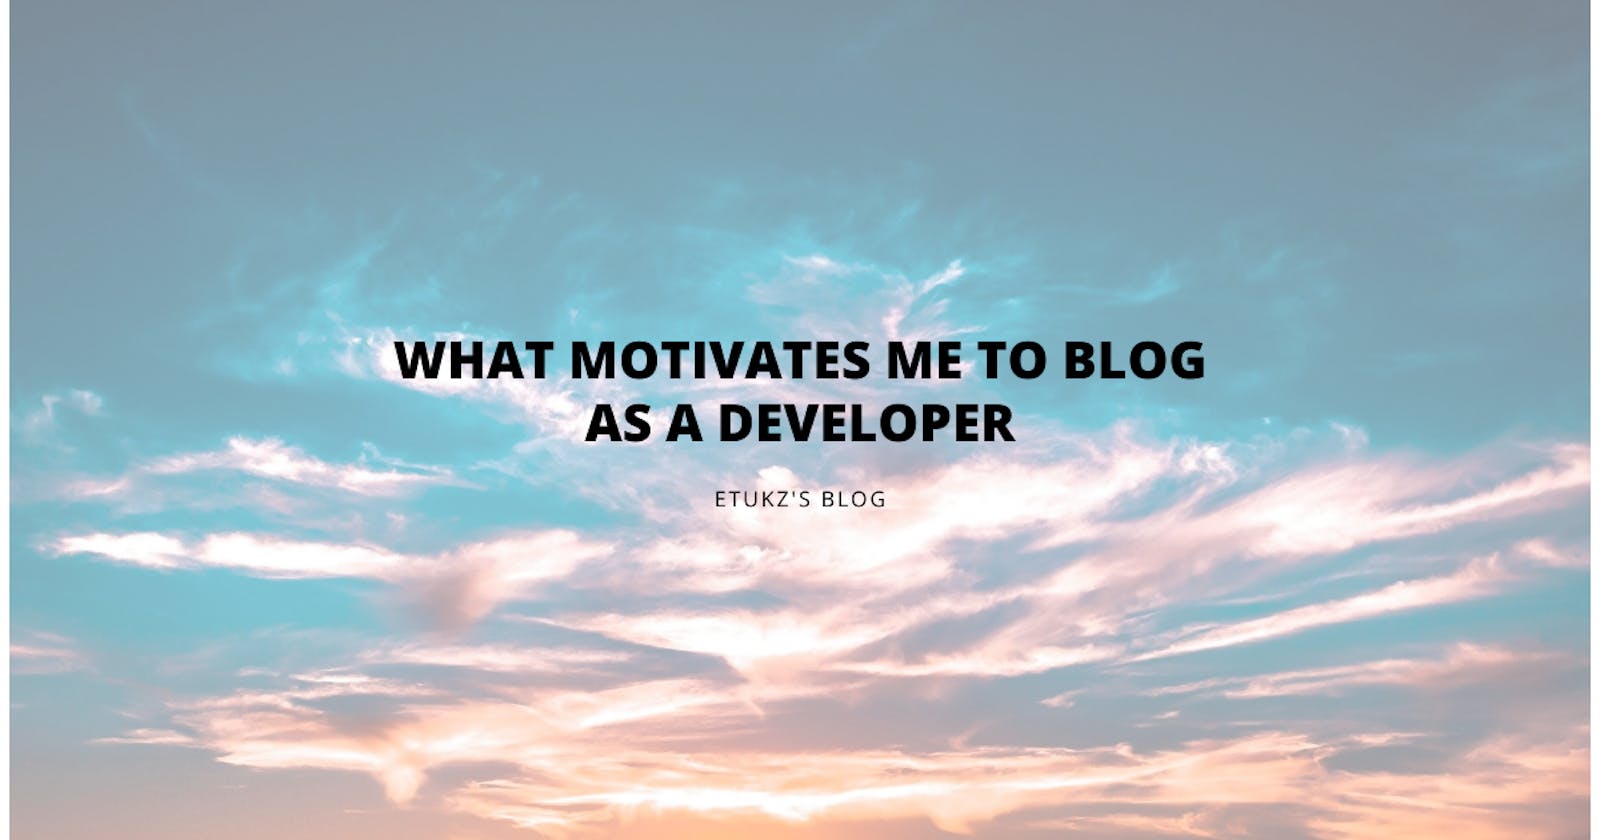 What motivates me to blog as a developer